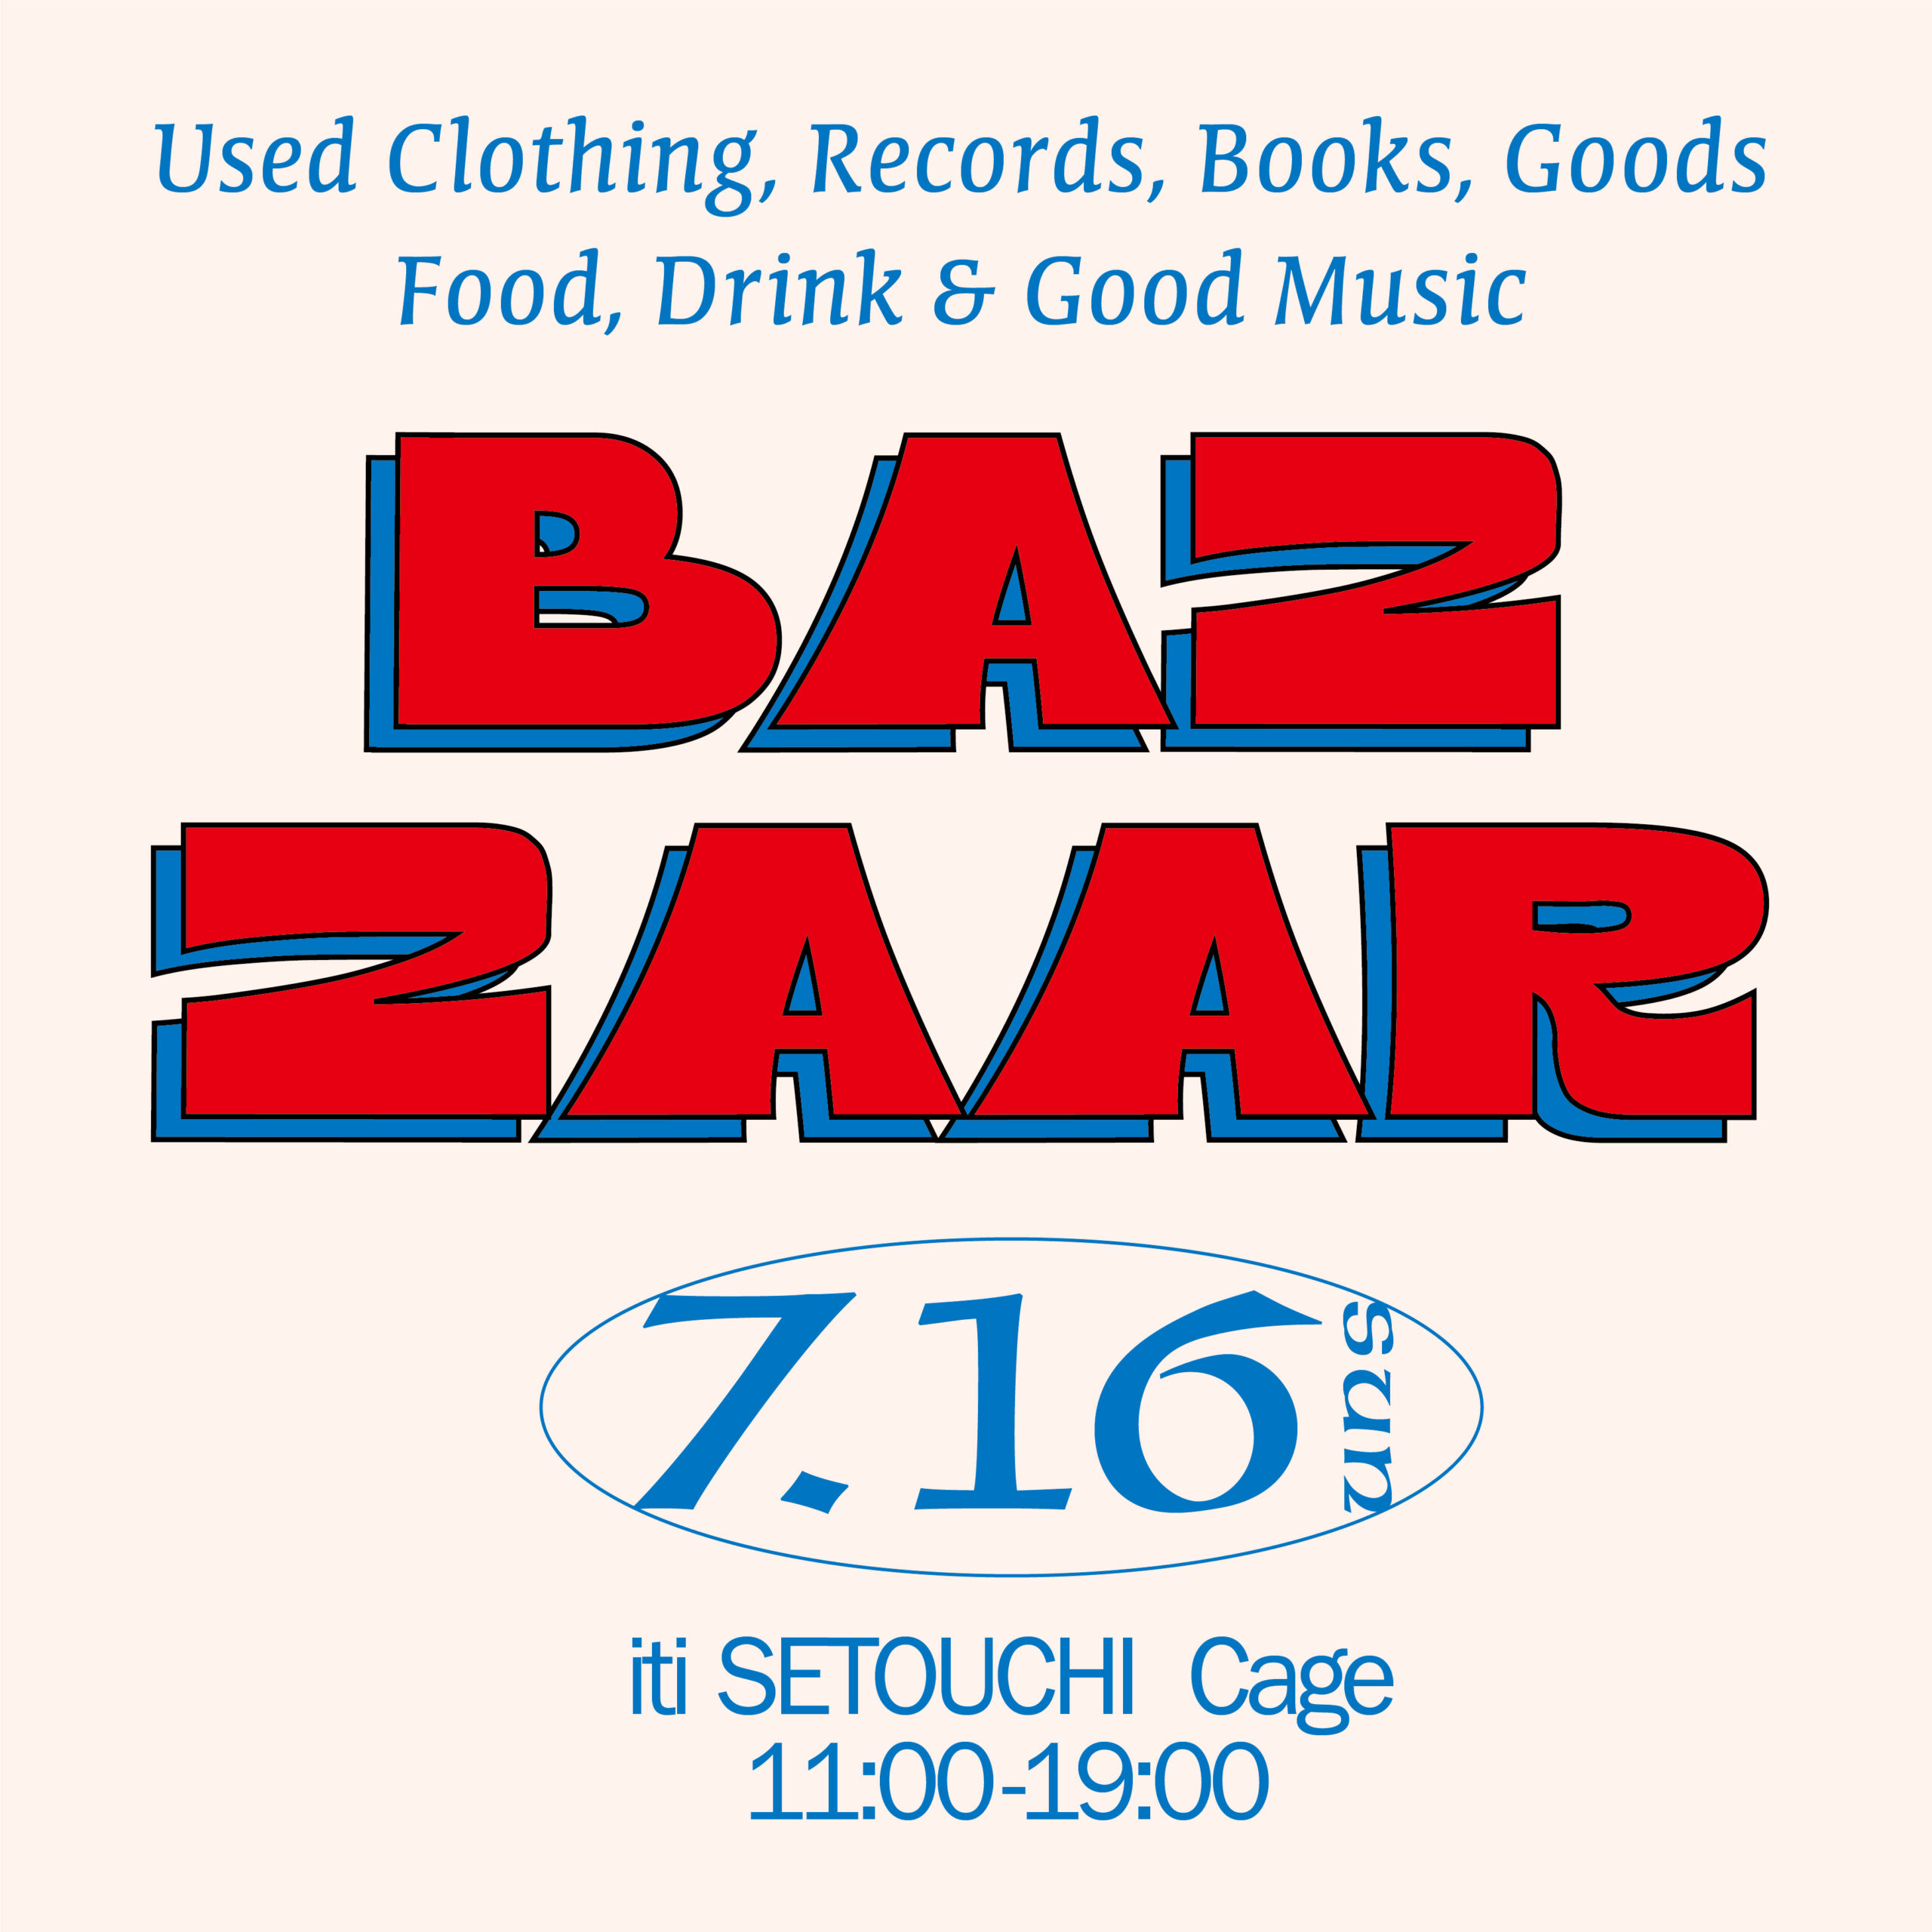 「BAZZAAR」Used Clothing, Records, Books, Goods, Food, Drink & Good Music